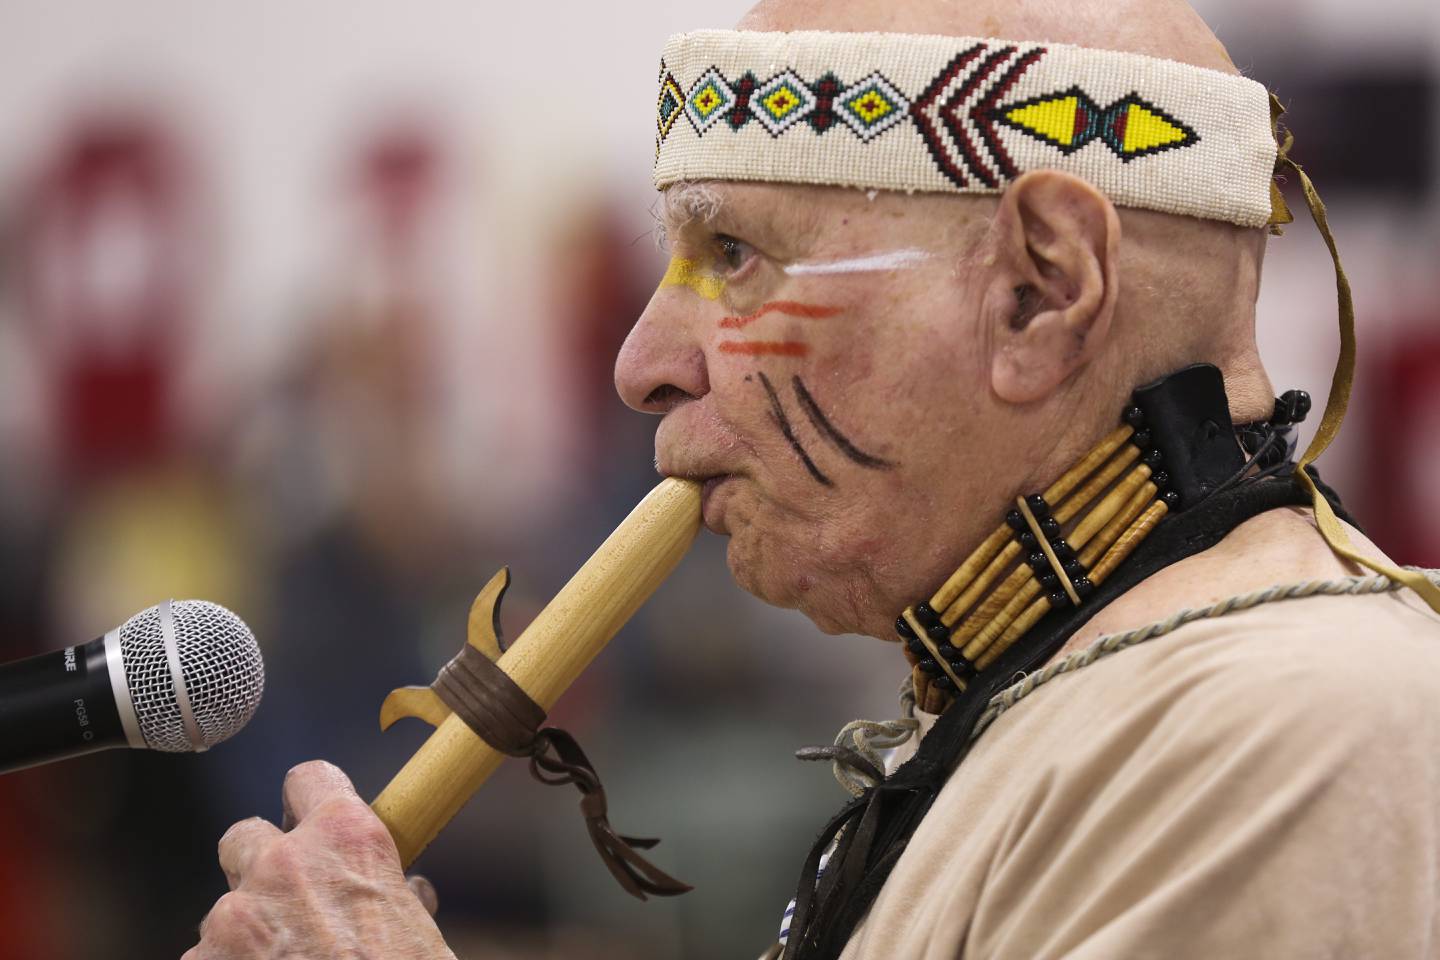 A Native American celebration of food, culture, and heritage took place at the 46th Annual BAIC PowWow at the Maryland State Fairgrounds in Timonium on November 19, 2022.